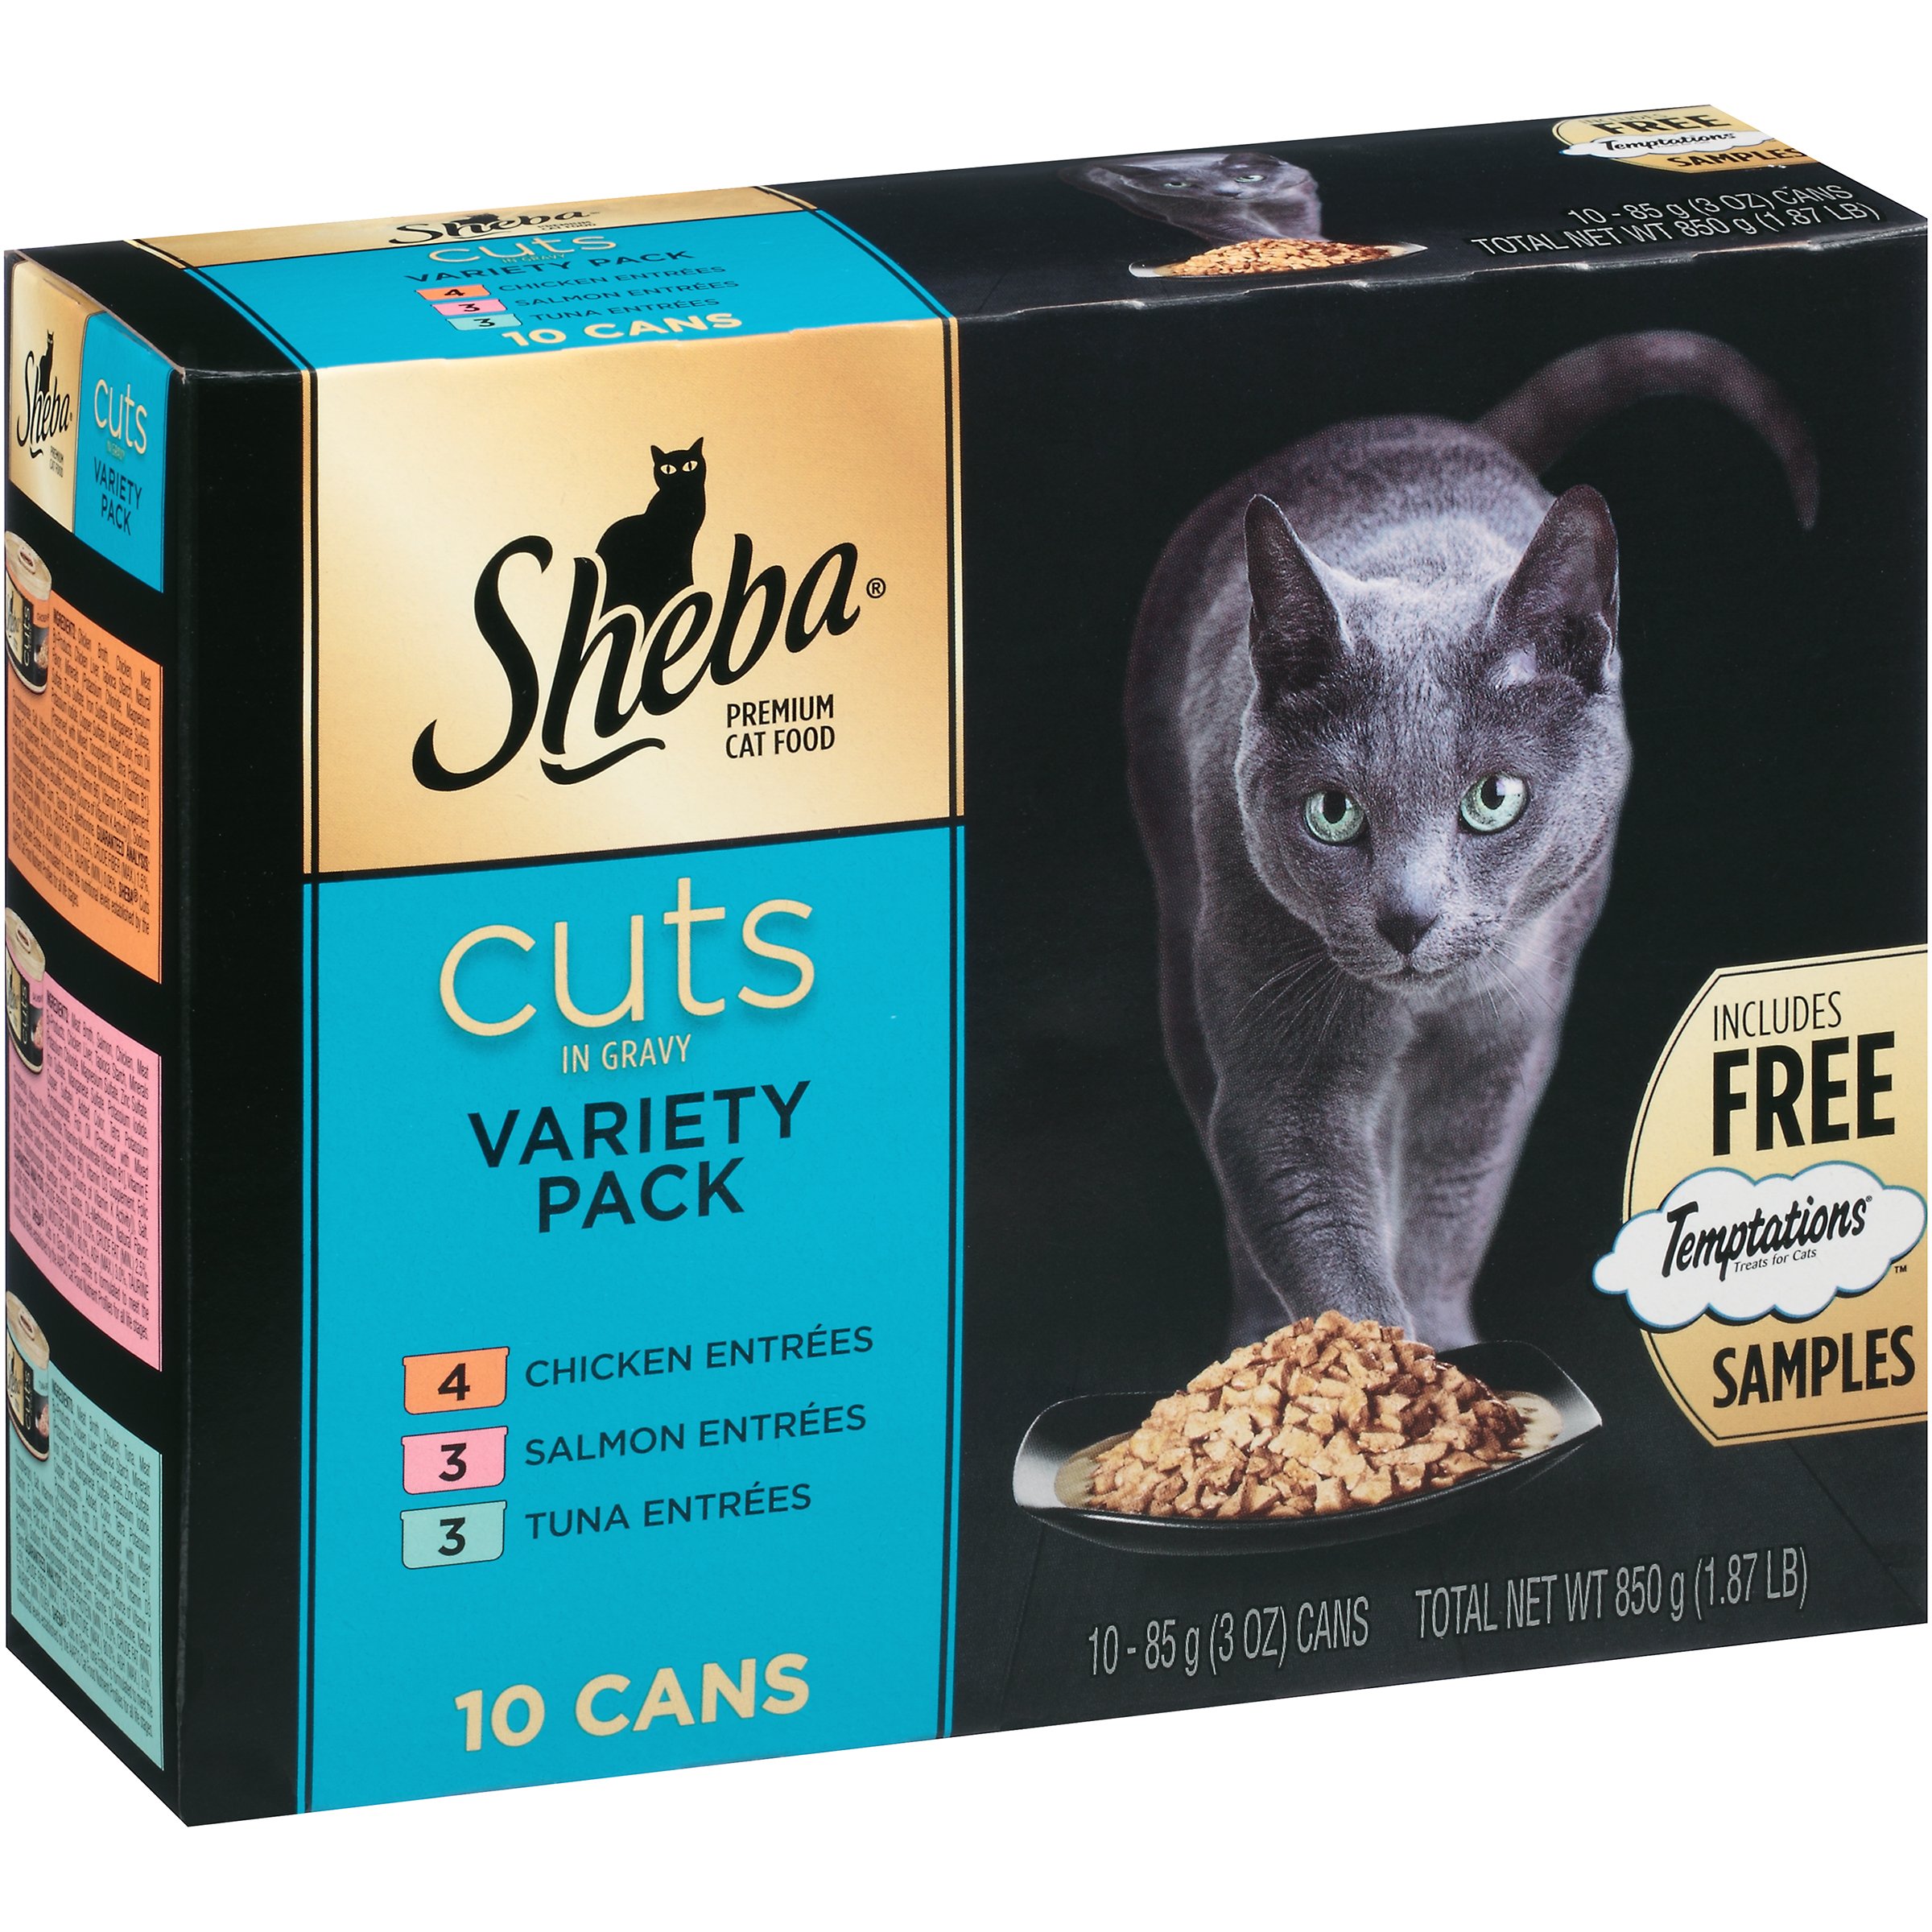 Sheba Premium Cuts In Gravy Cat Food Variety Pack Shop Cats at HEB